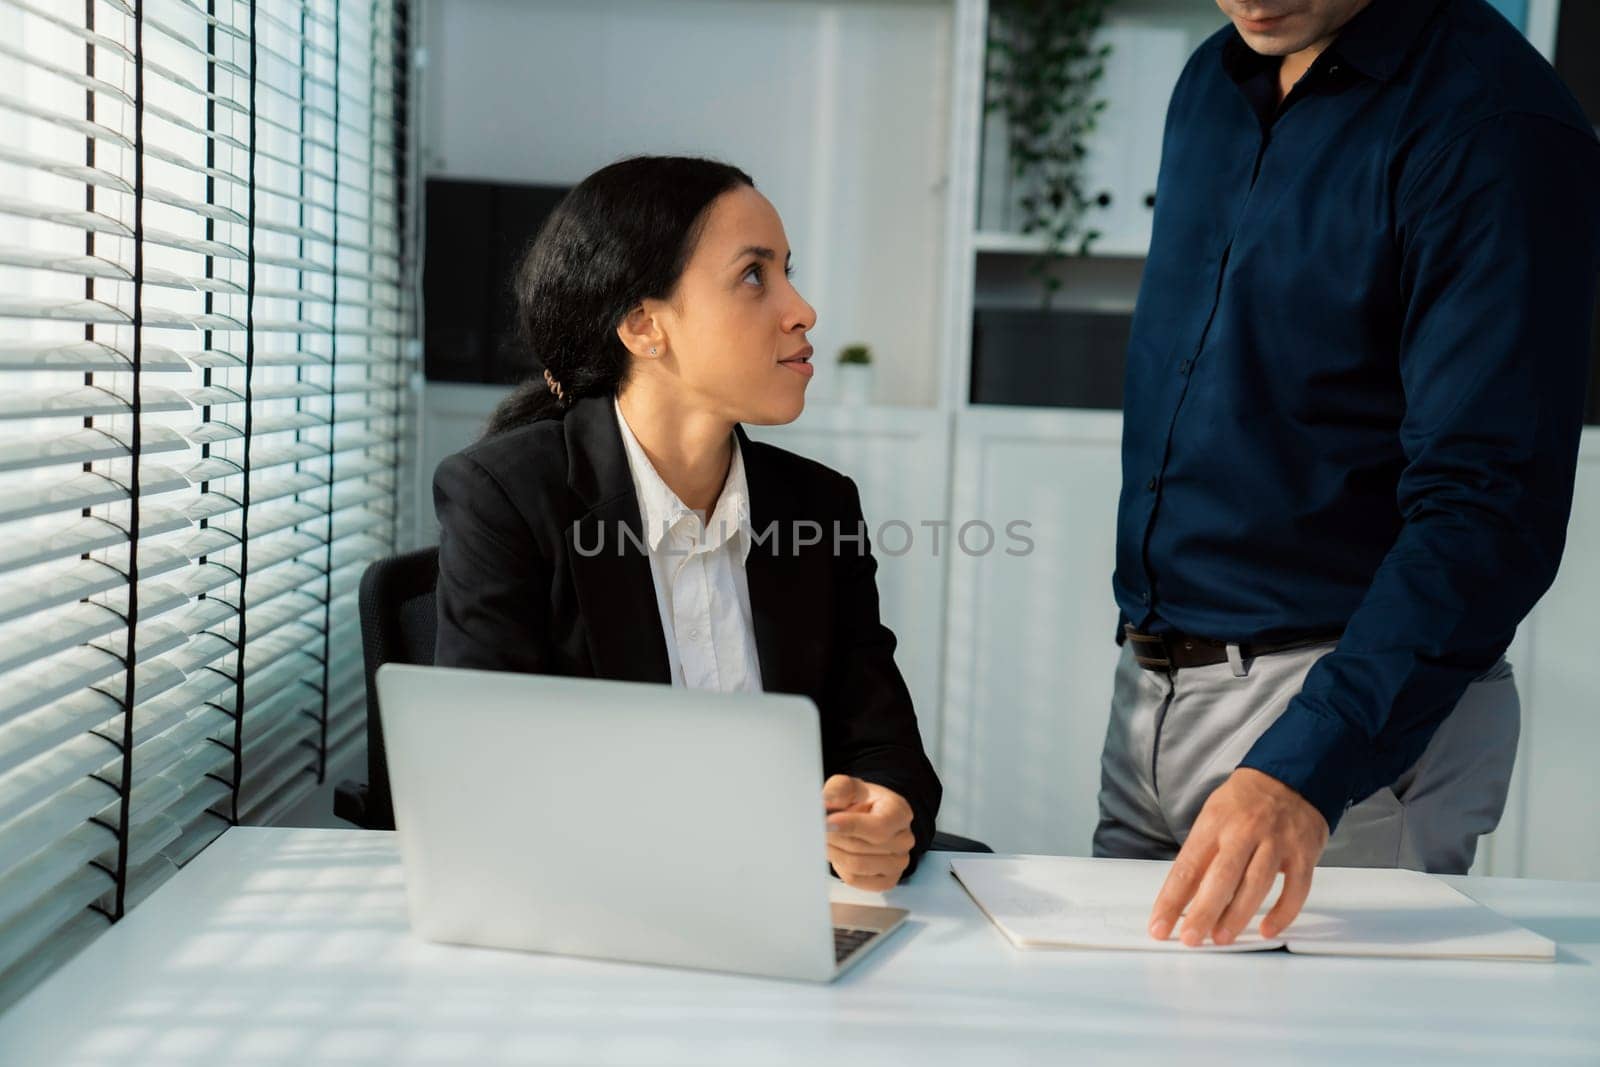 Competent female employee discussing with her colleague, employer using laptop at her office. Interpersonal relations among coworkers.